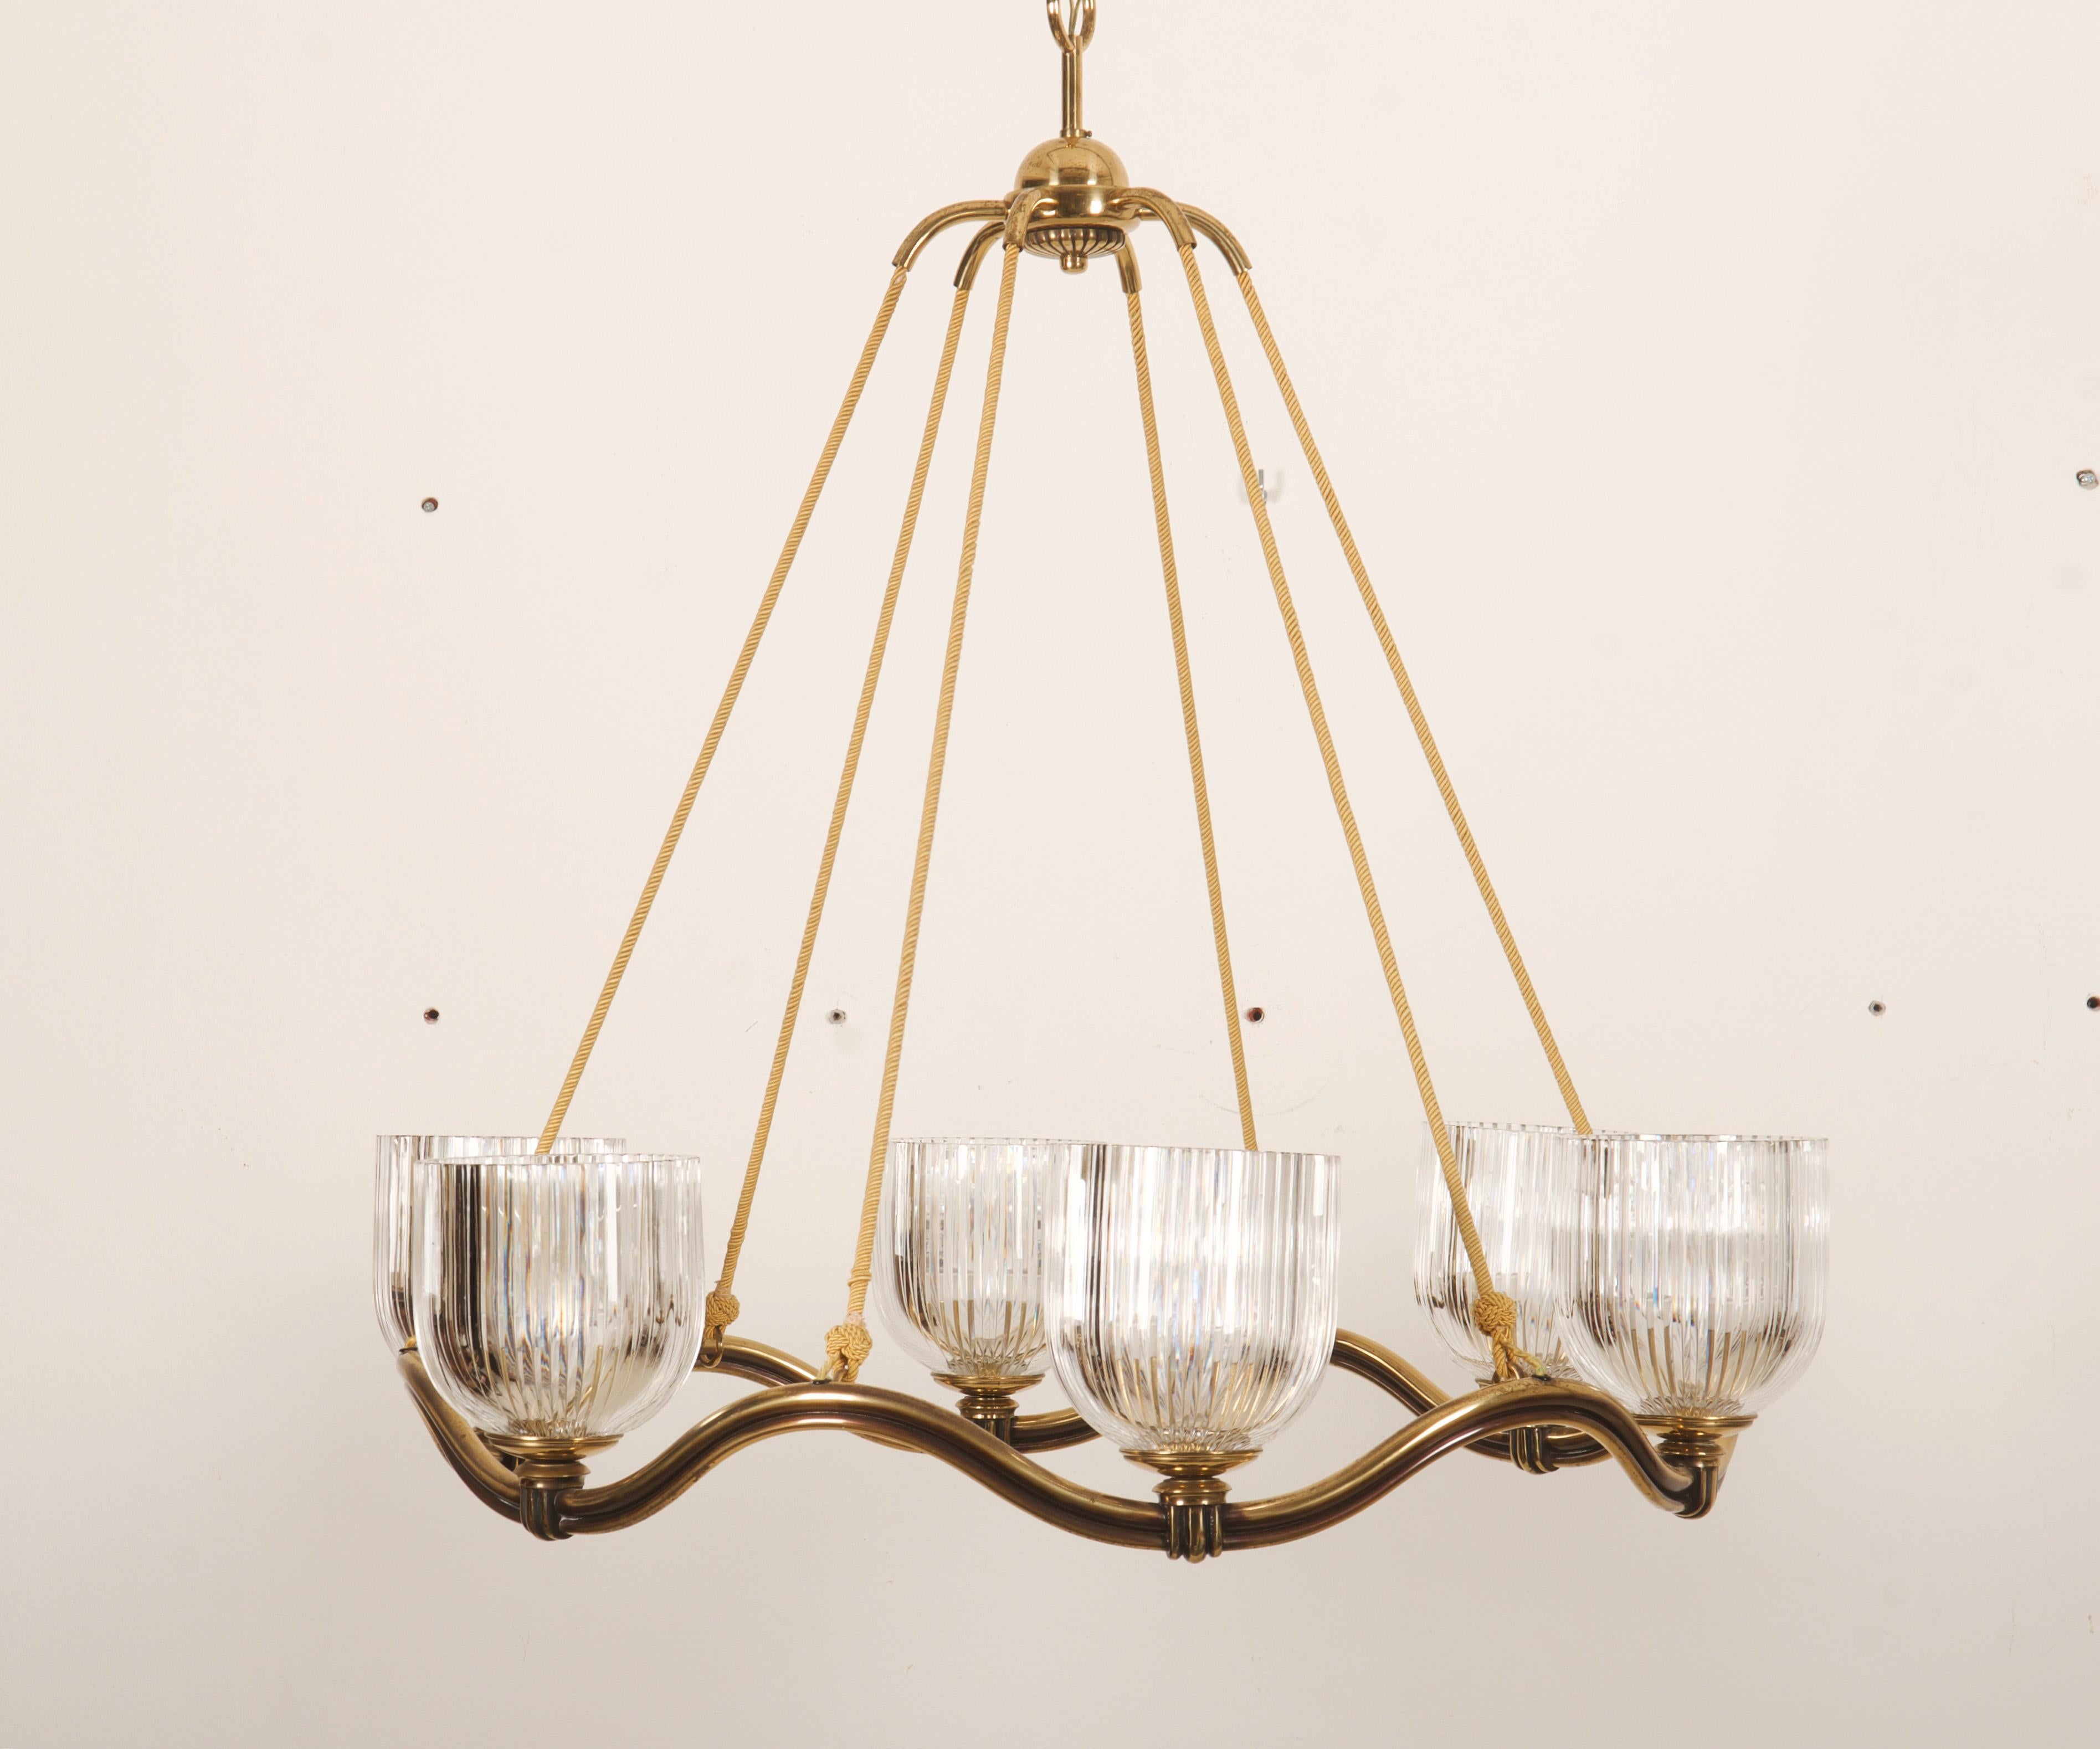 Brass wave-ring form fitted with six E27 sockets and hand blown and hand grinded crystal glass shades originally desigend by Otto Prutscher for Lobmeyr in the 1930s. The chandelier was designed in the 1930s by Hugo Gorge but this one was made in the